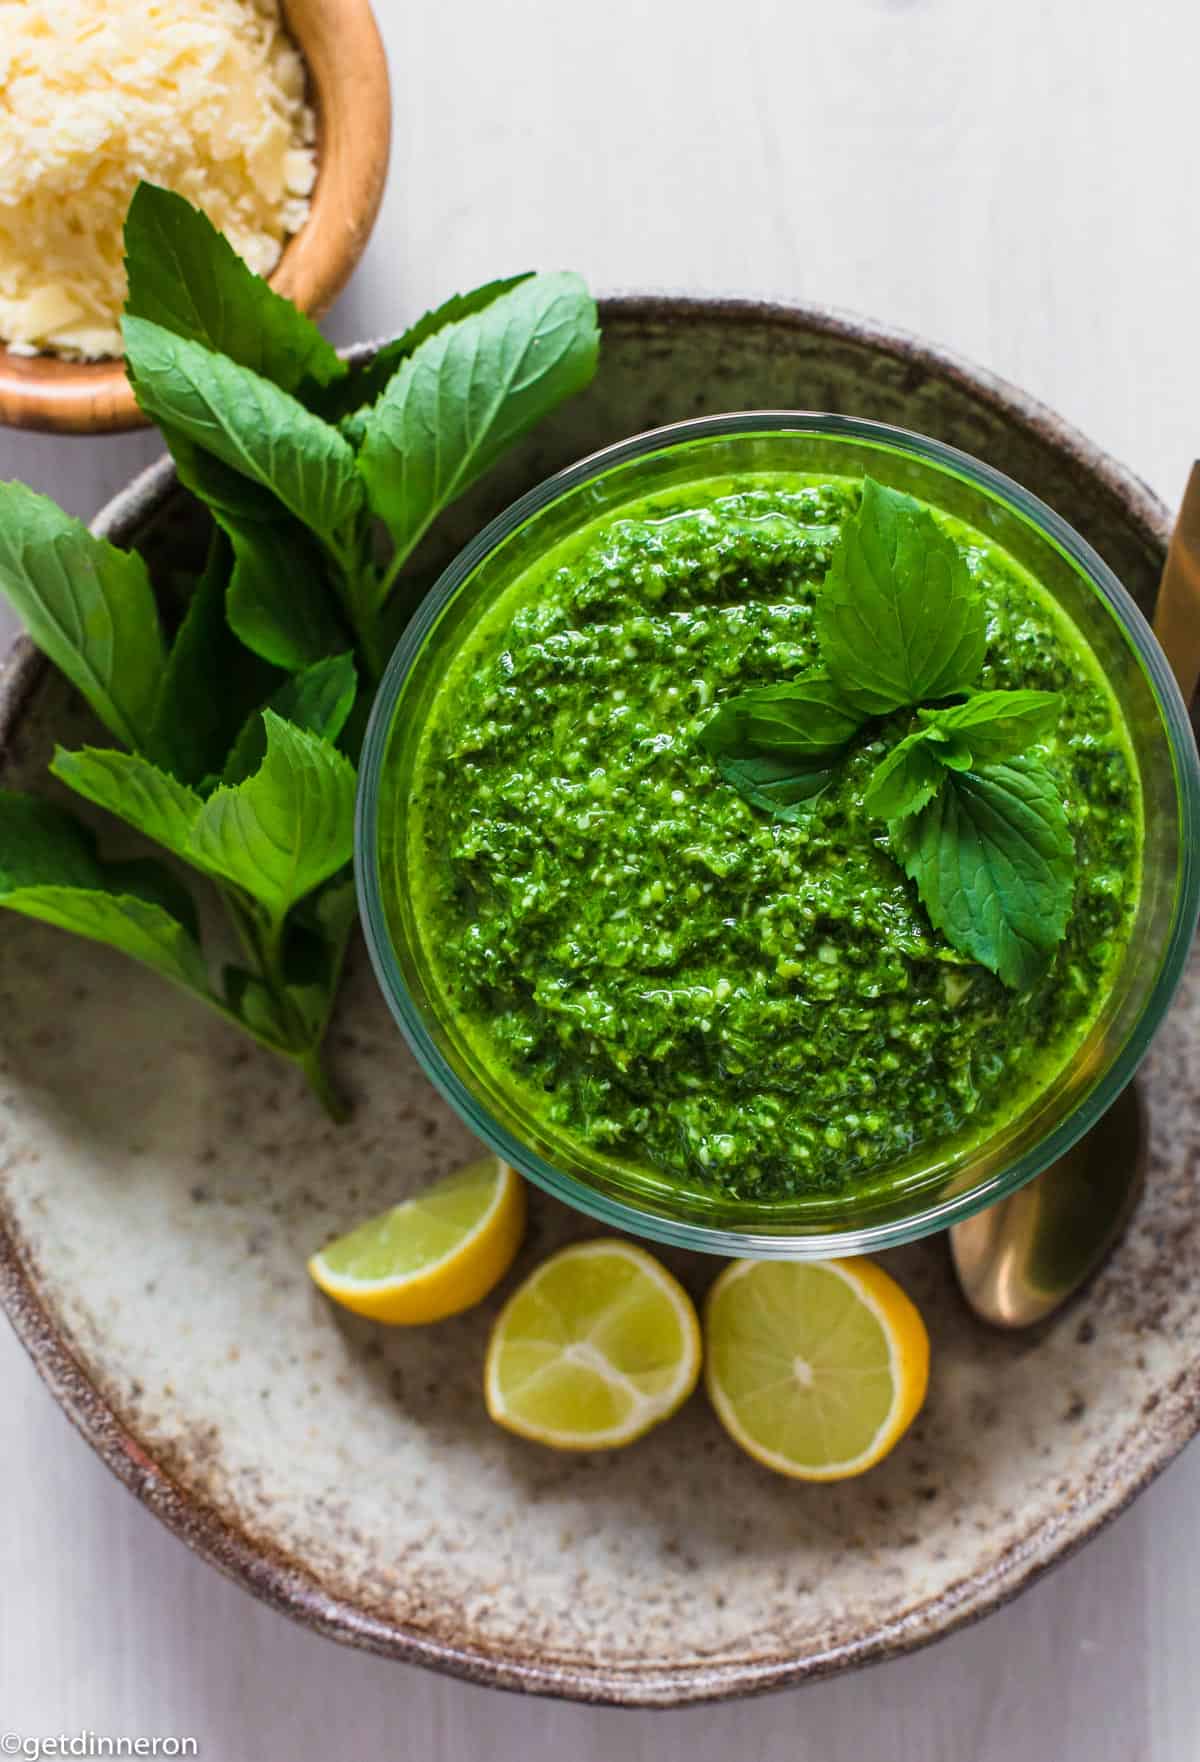 Overhead view of pesto in glass bowl surrounded by fresh cut lemons and basil leaves.